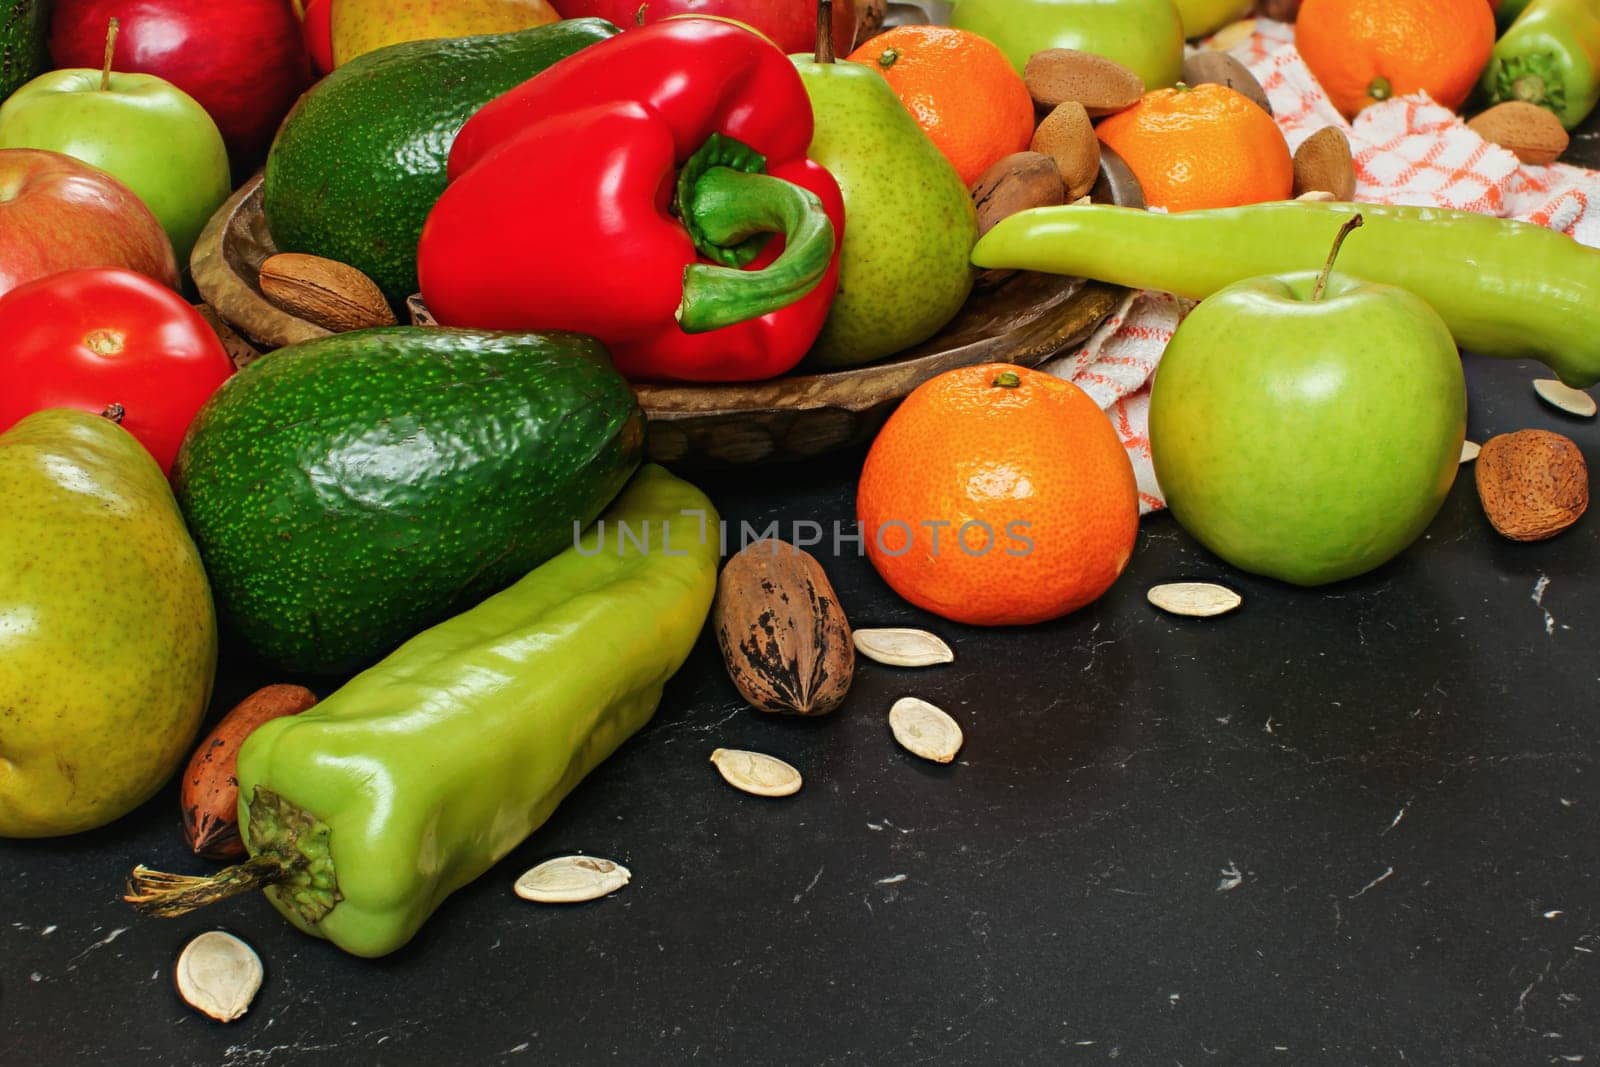 Mixed fruits and vegetables - red peppers, avocado, apples, pears, tangerines, pecan nuts, almonds and pumpkin seeds on wooden bowl, close up view by Ivanko